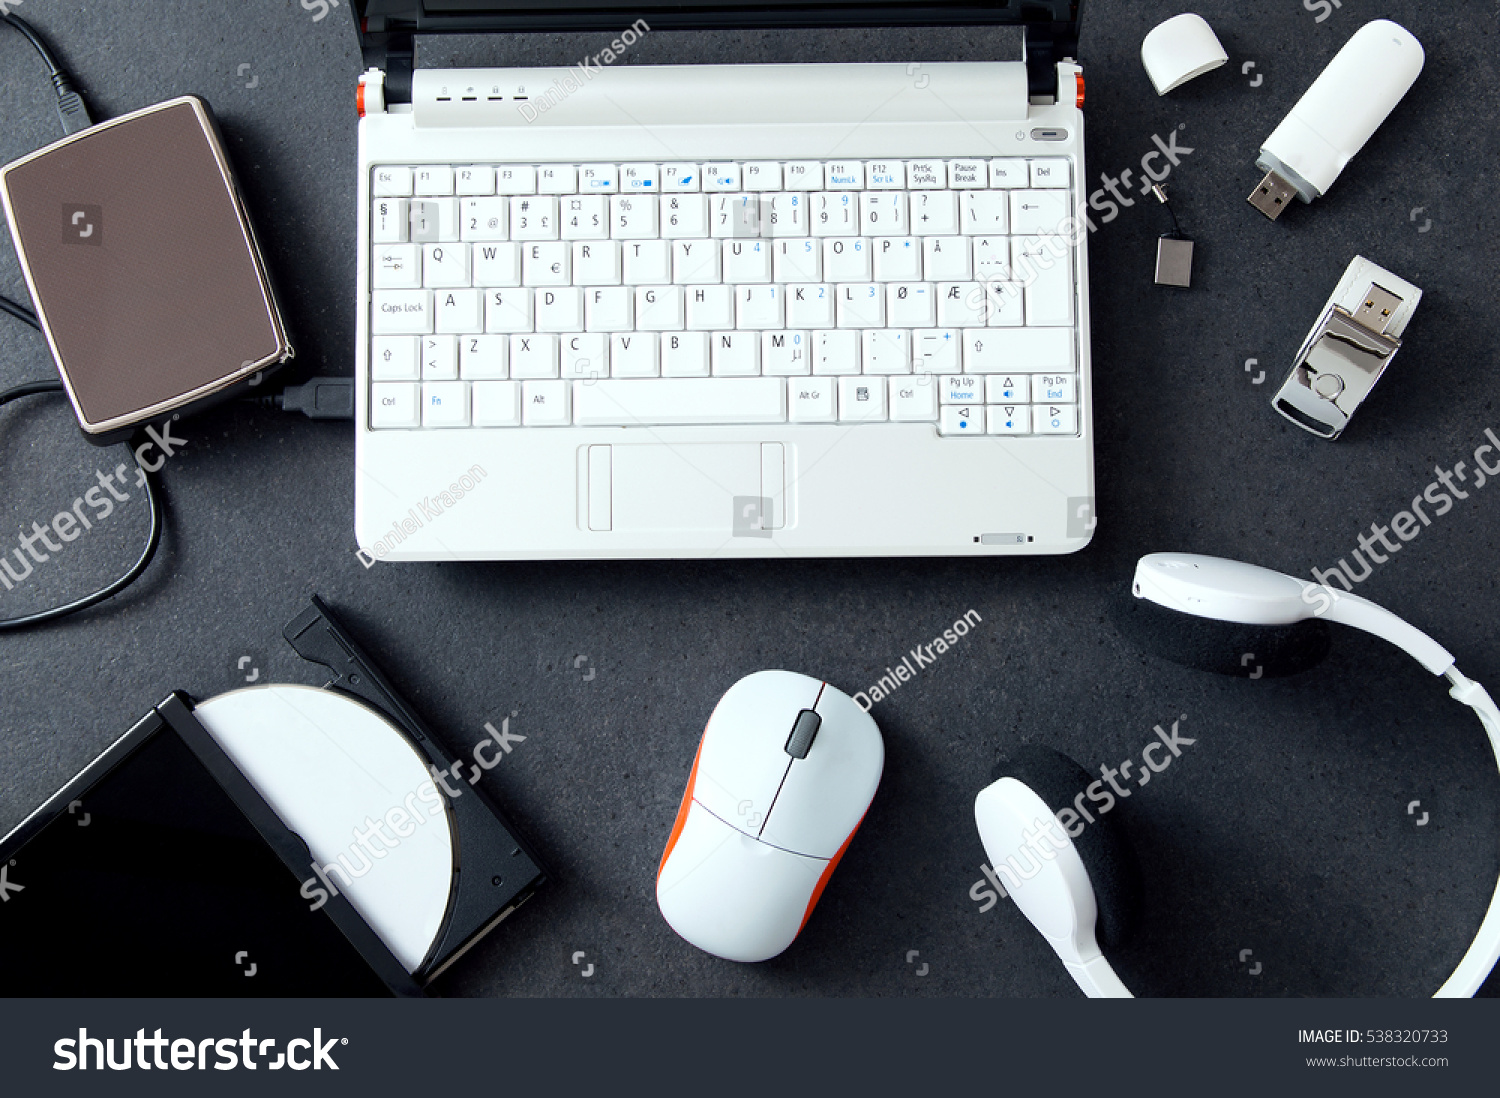 Computer peripherals & laptop accessories. Composition on stone counter #538320733